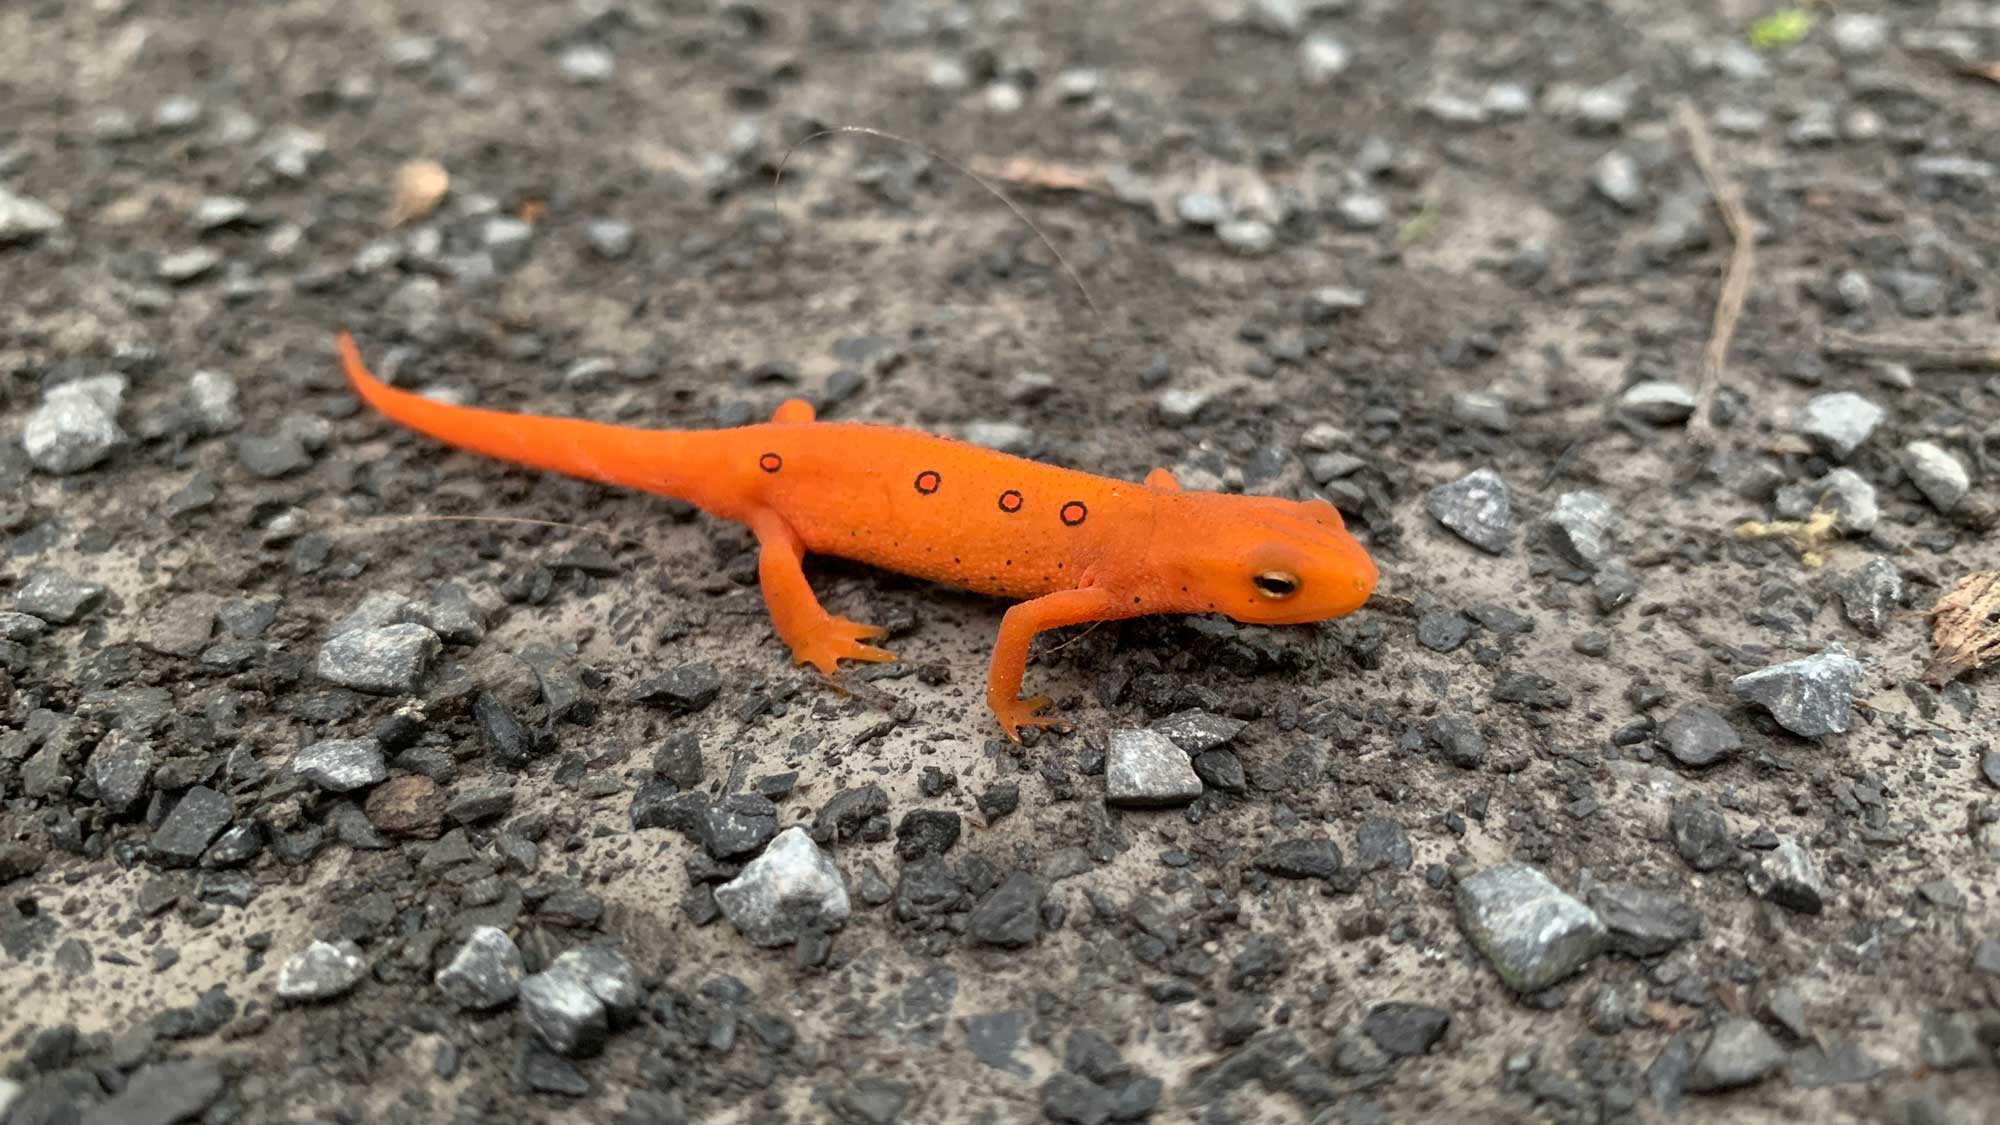 Photograph of a small red eft salamander.